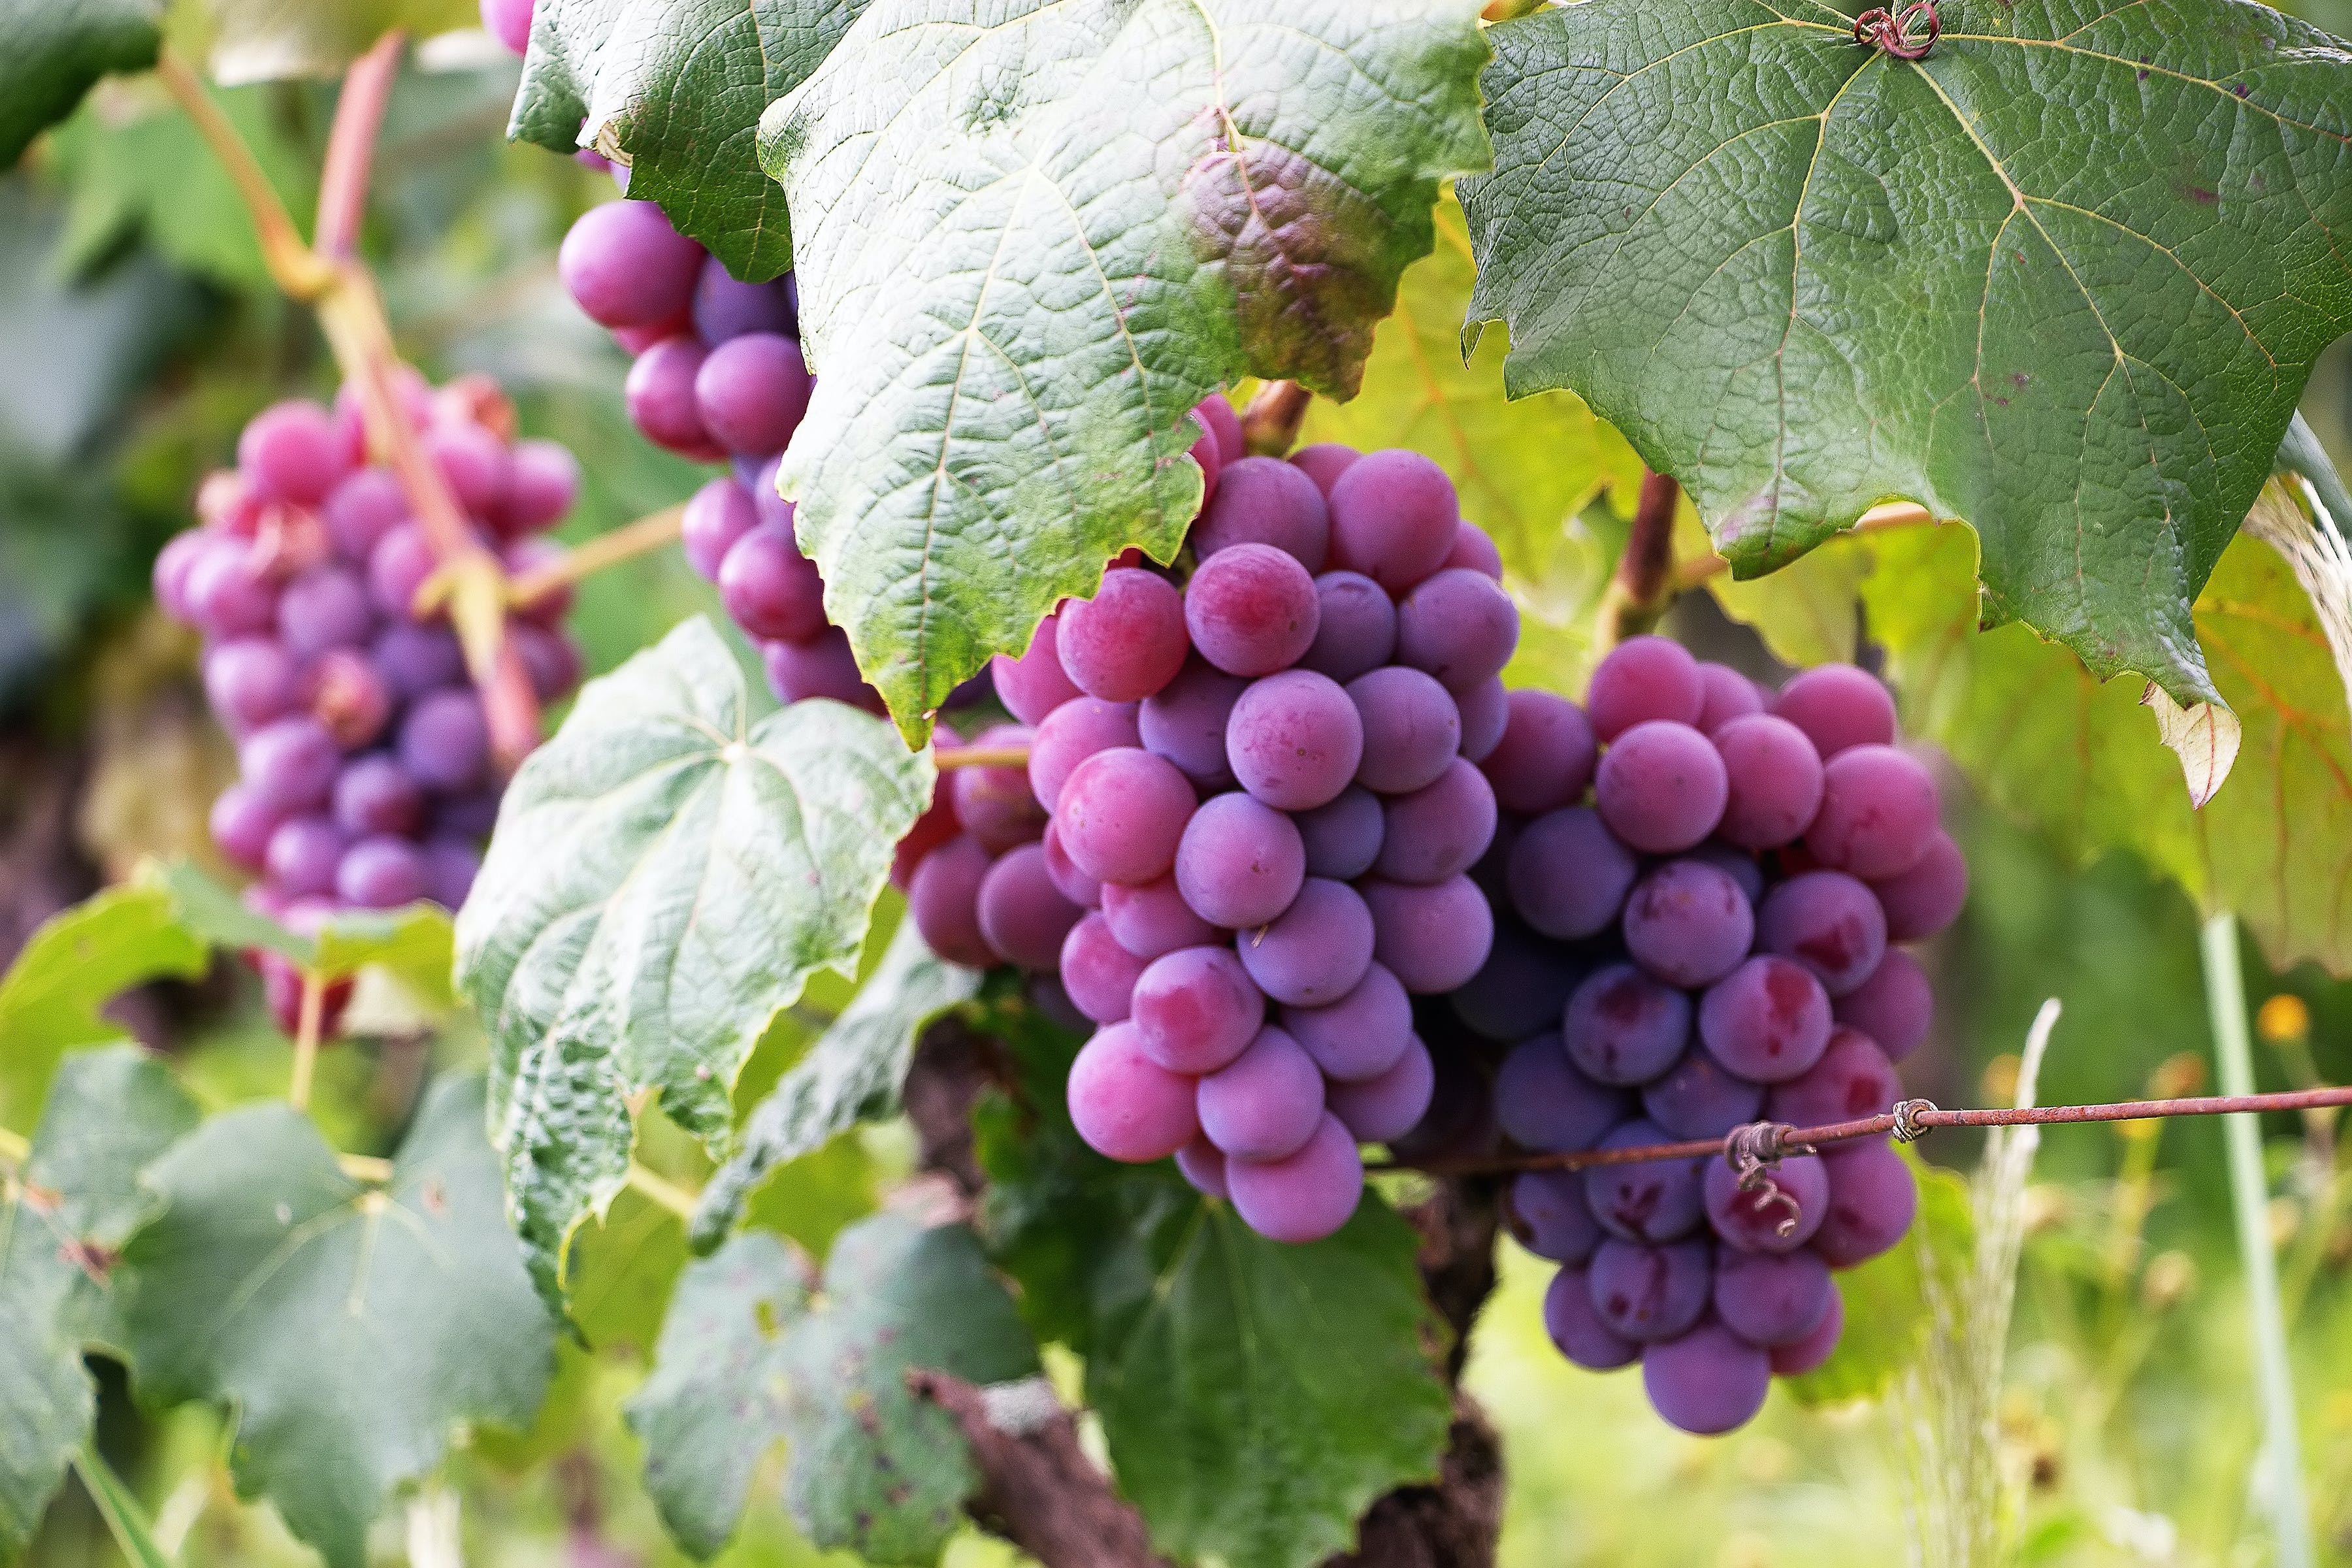 Fruits you can farm and grow in a greenhouse: Grapes